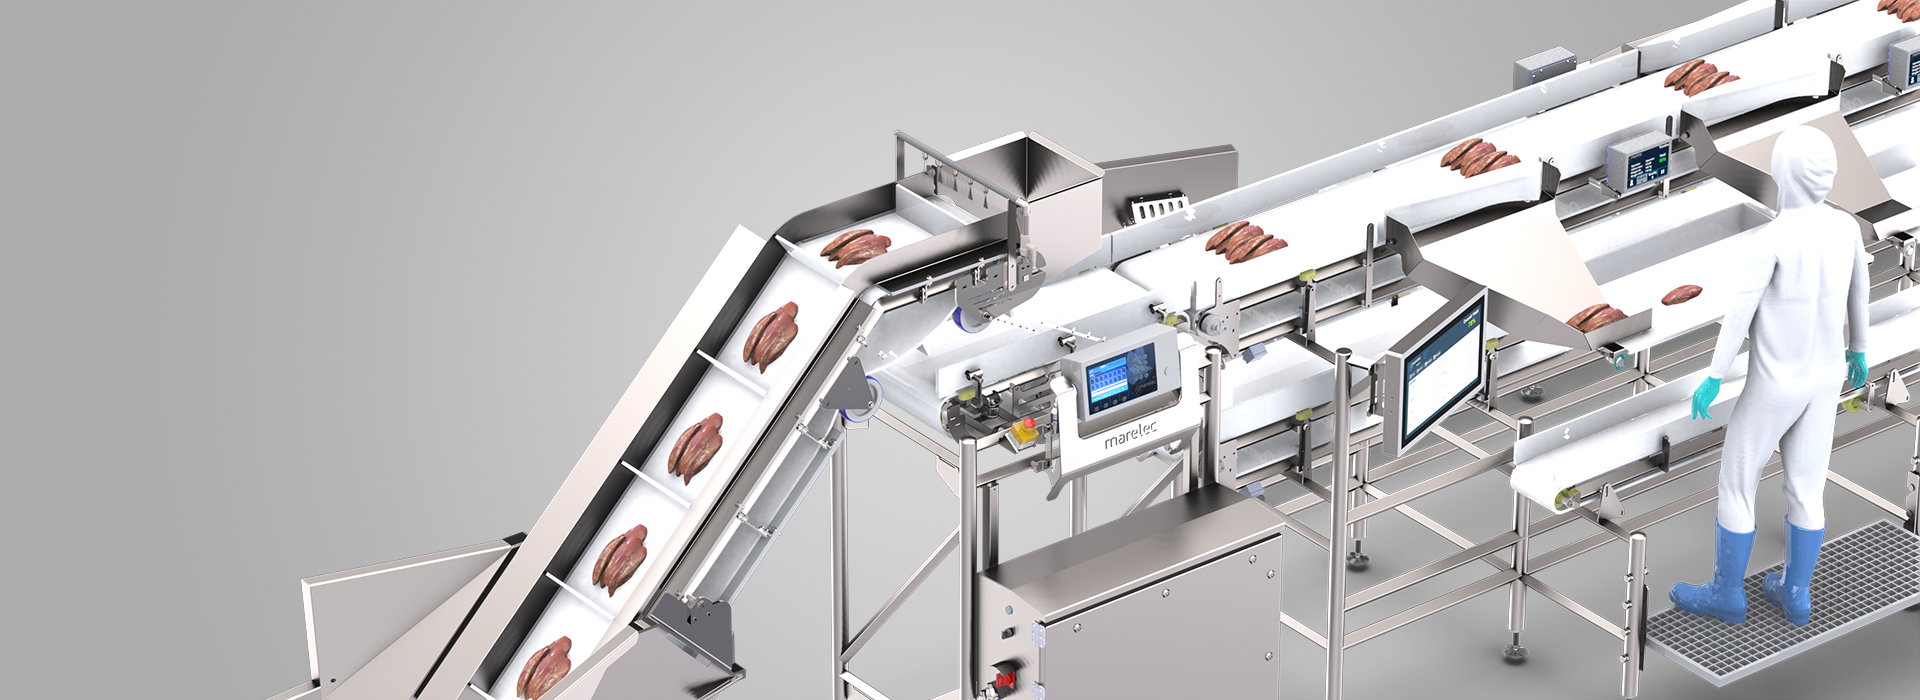 Intelligent poultry trimming line monitoring live yield, capacity, and quality per operator